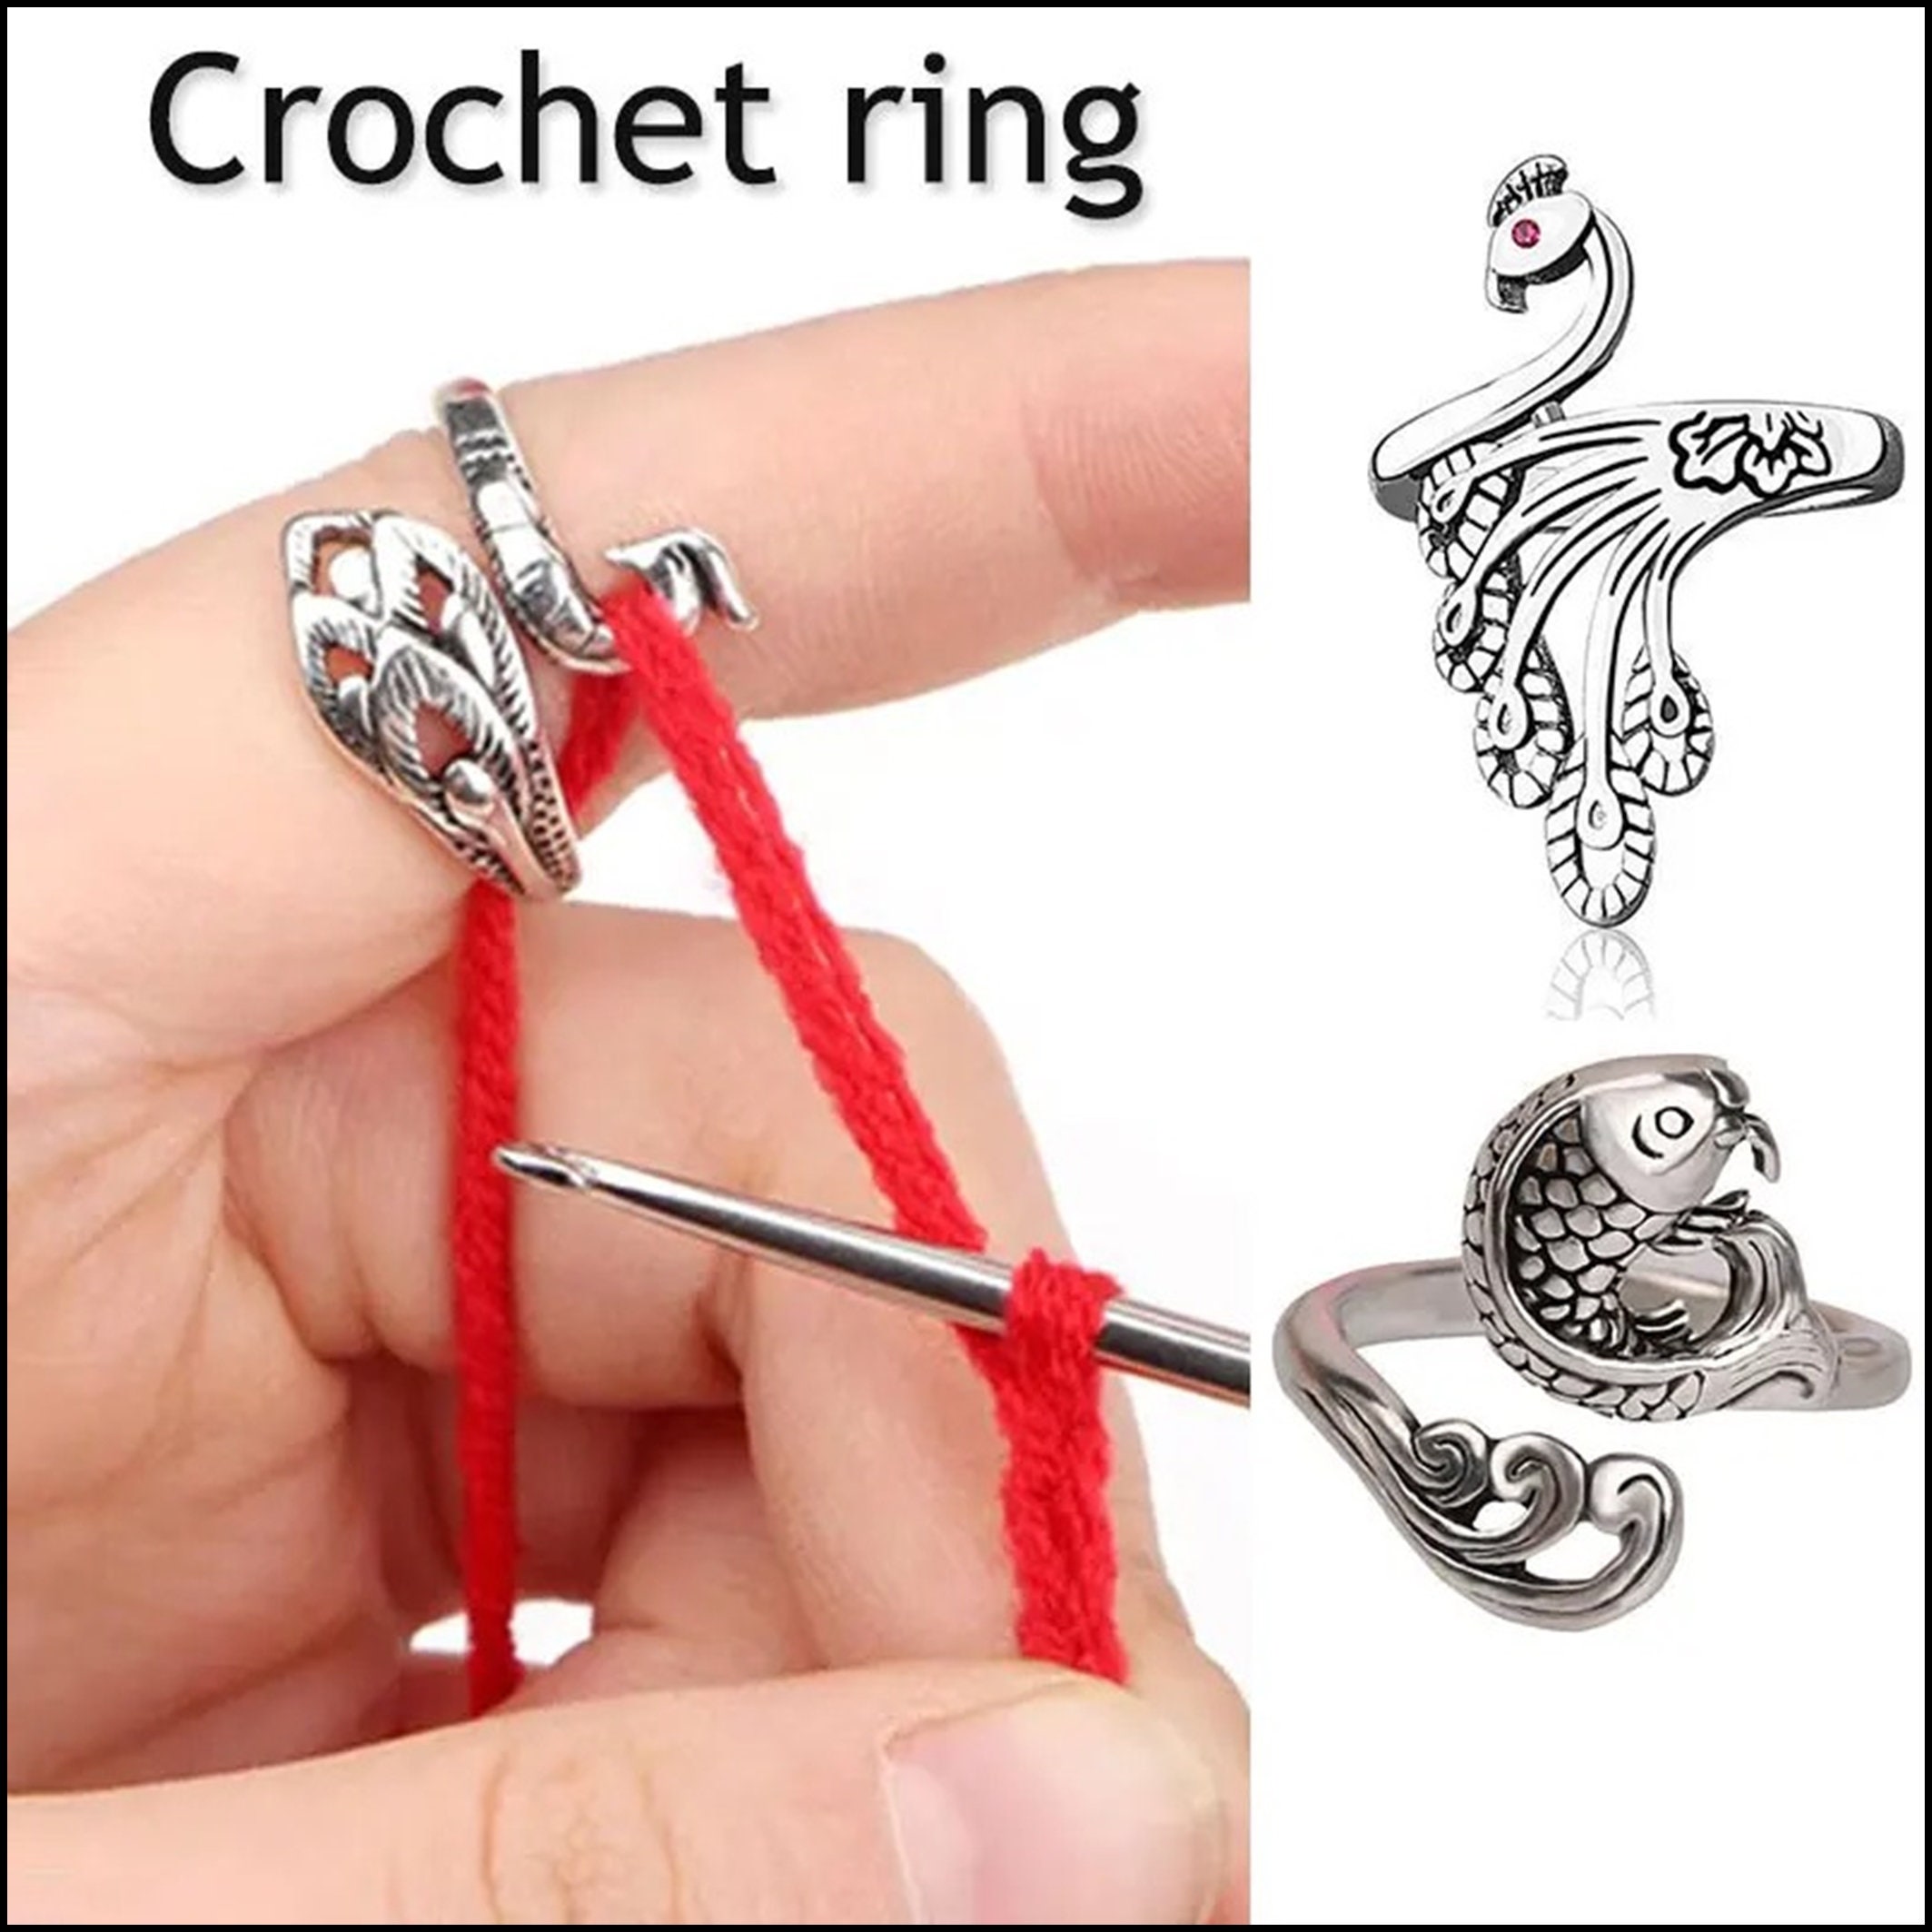 Adjustable Knitting Loop Crochet Loop Knitting Accessories, Hand-Made  Silver-Plated Copper Rings, Faster Crocheting, Advanced Peacock Ring, Yarn  Guide Finger Holder Knitting Thimble